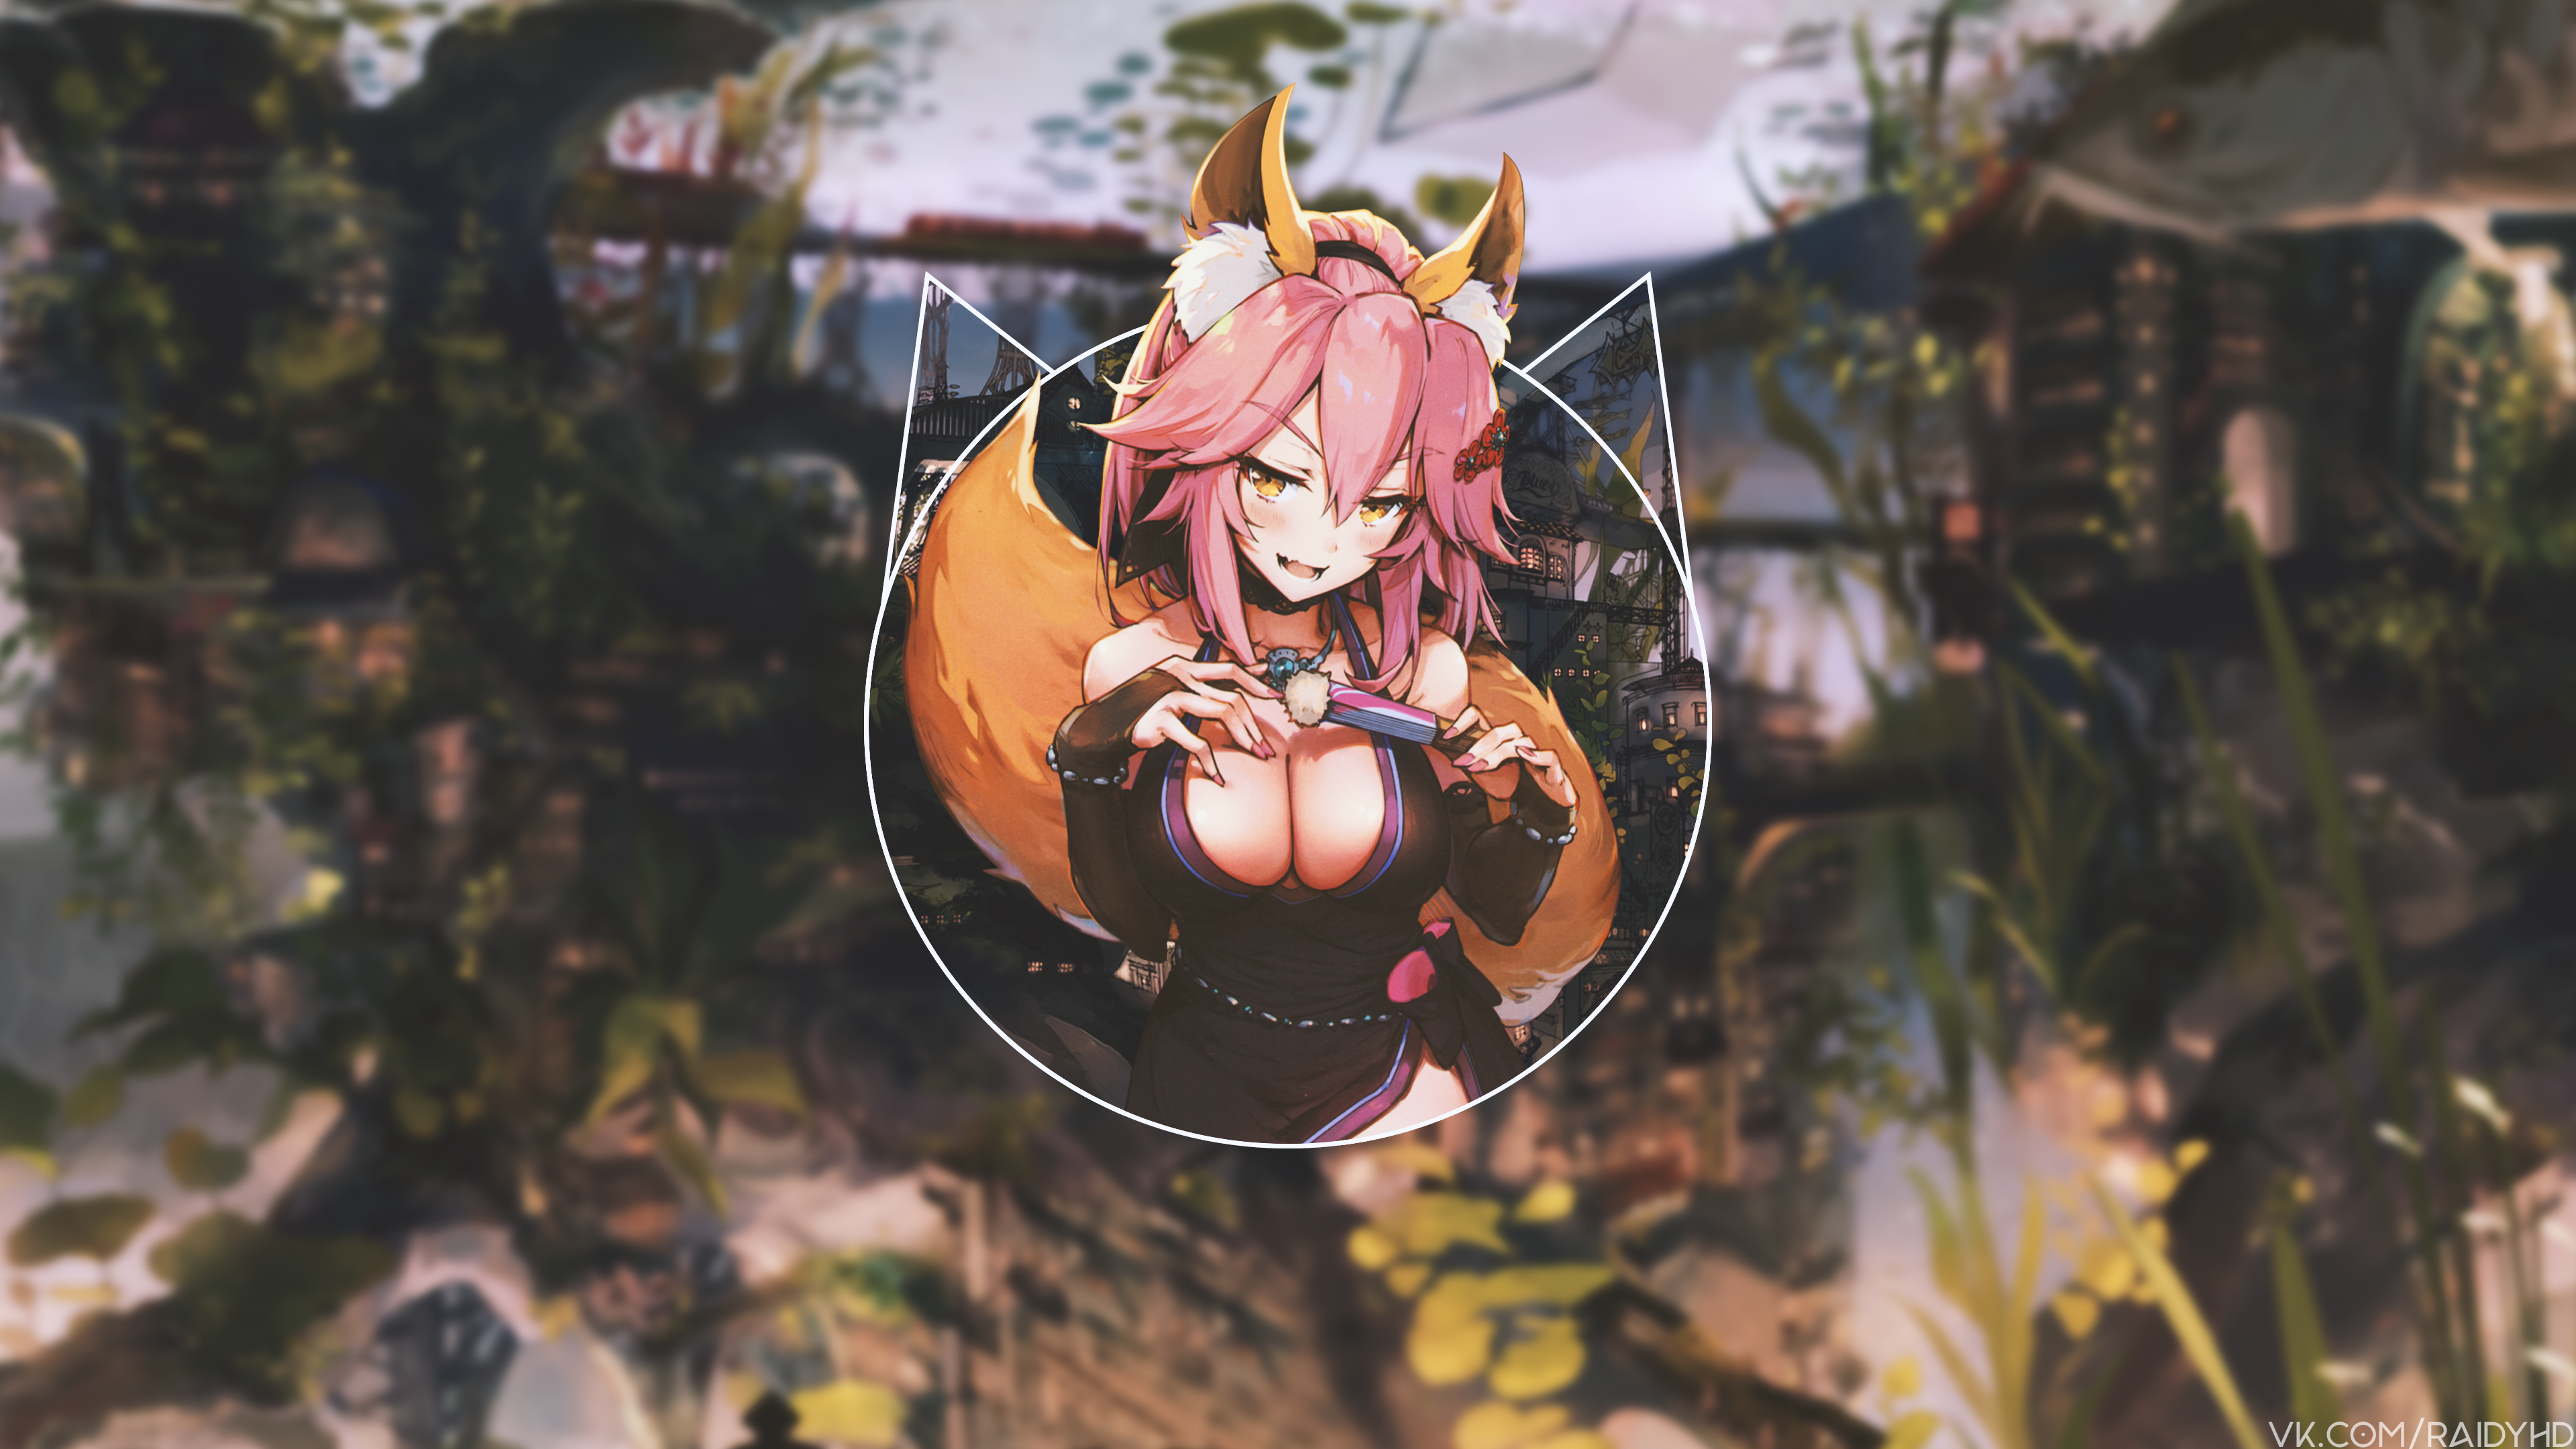 Anime 3840x2160 anime anime girls picture-in-picture Tamamo no Mae (fate/grand order) Fate/Grand Order pink hair boobs cleavage animal ears yellow eyes